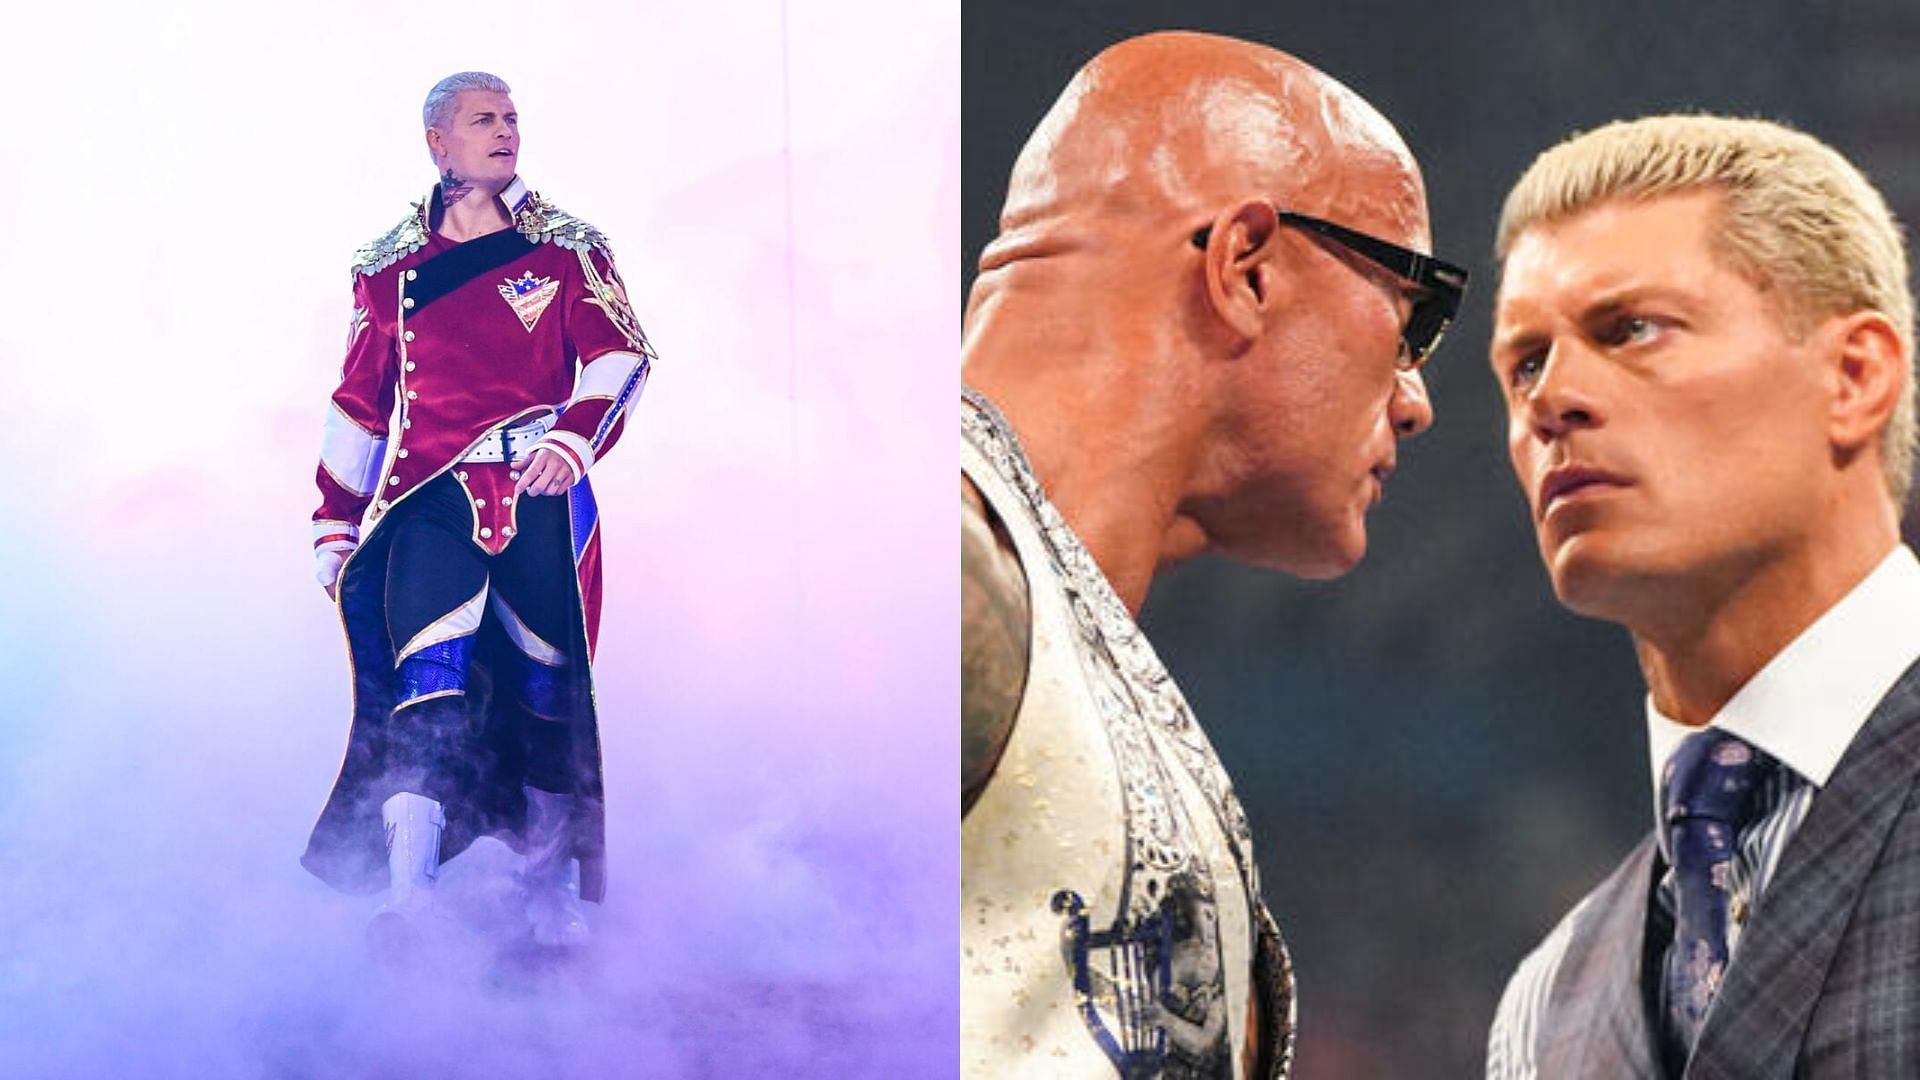 Cody Rhodes is involved in a bitter rivalry with The Rock